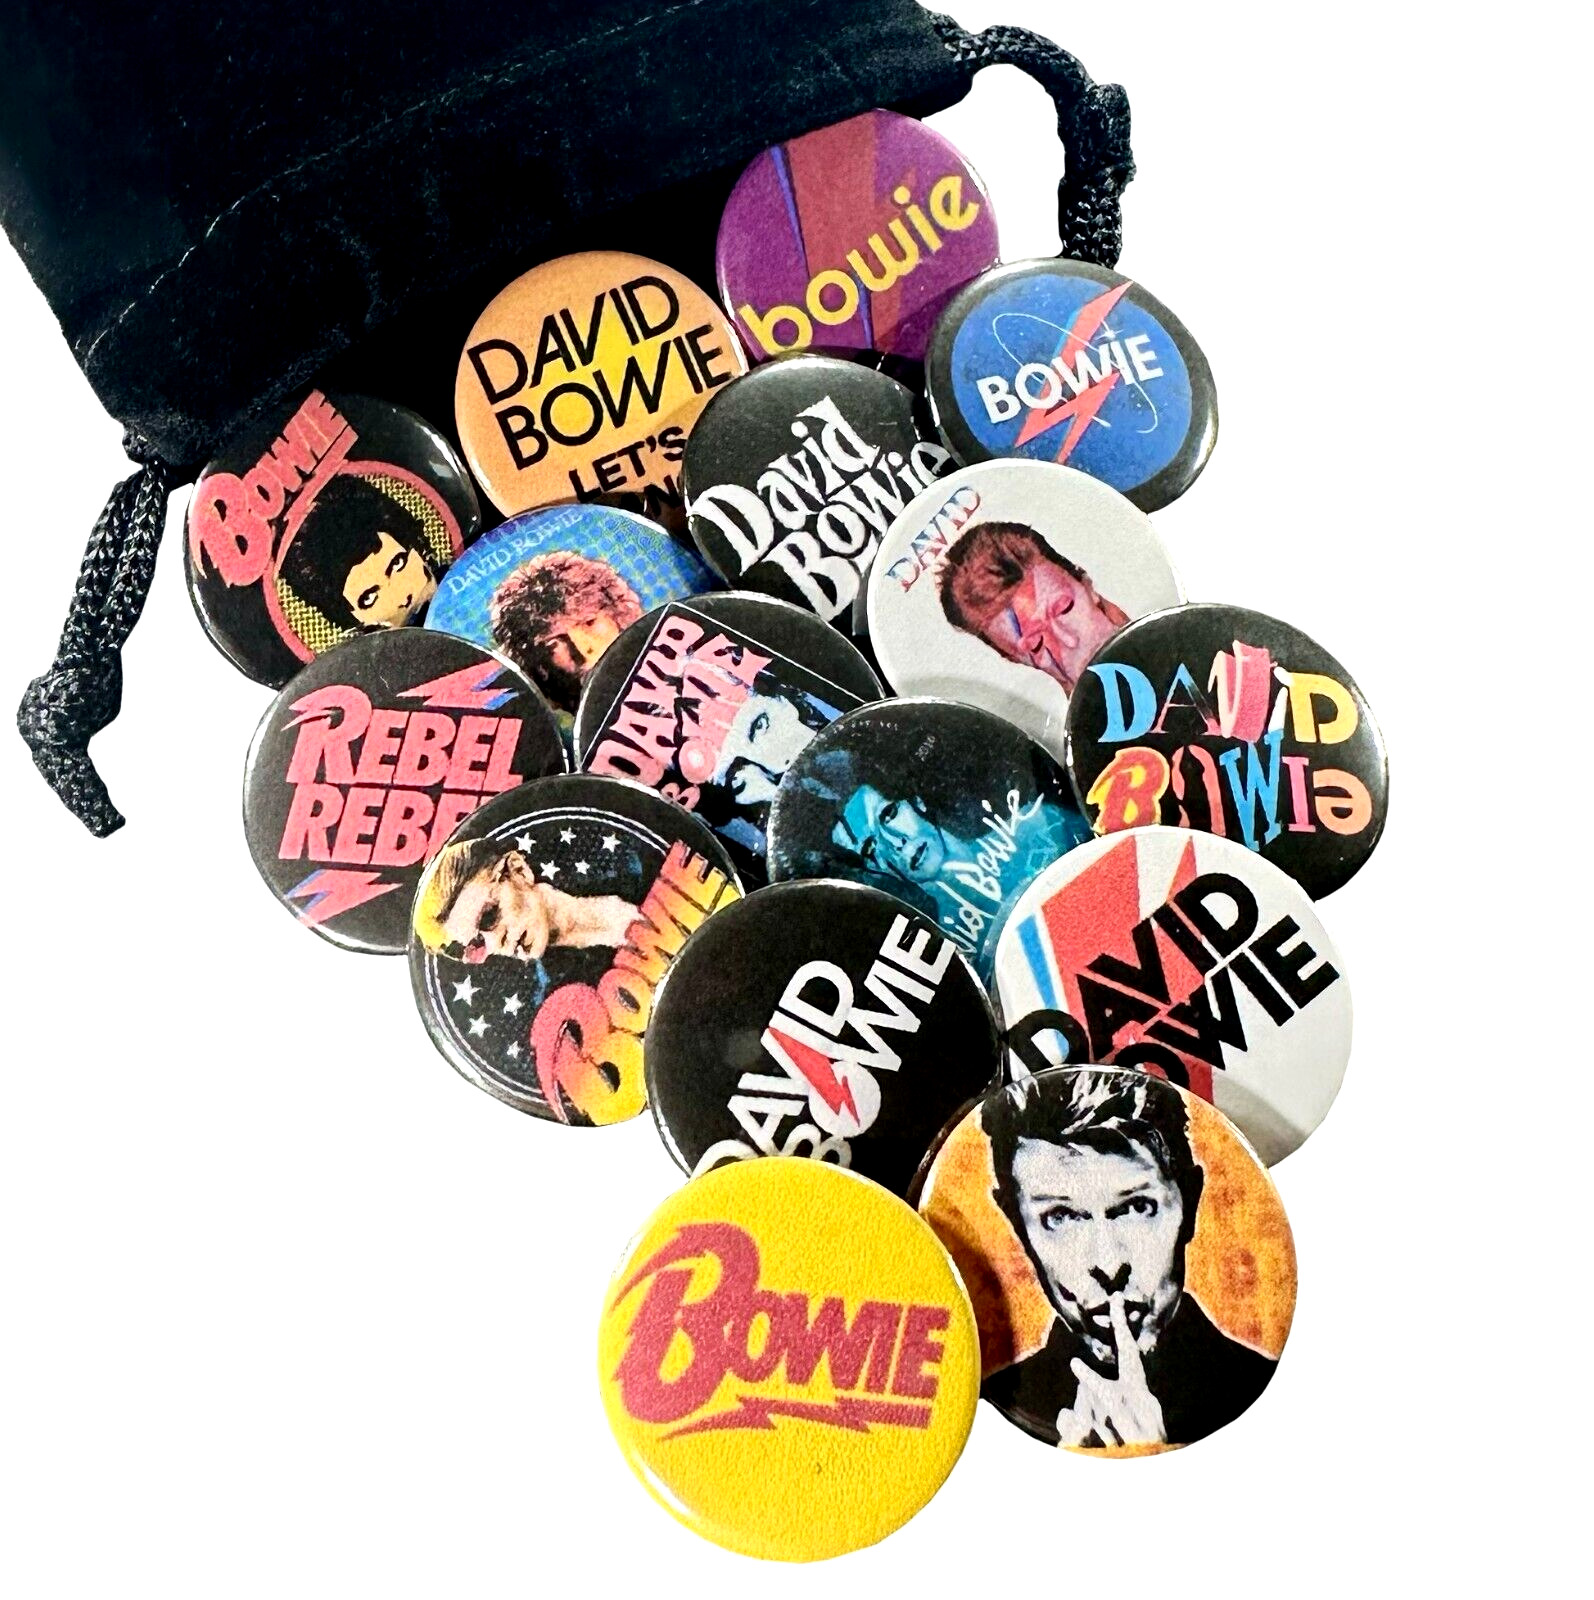 DAVID BOWIE Pinback Buttons 70s 80s Art Glam Rock New Wave Music 1